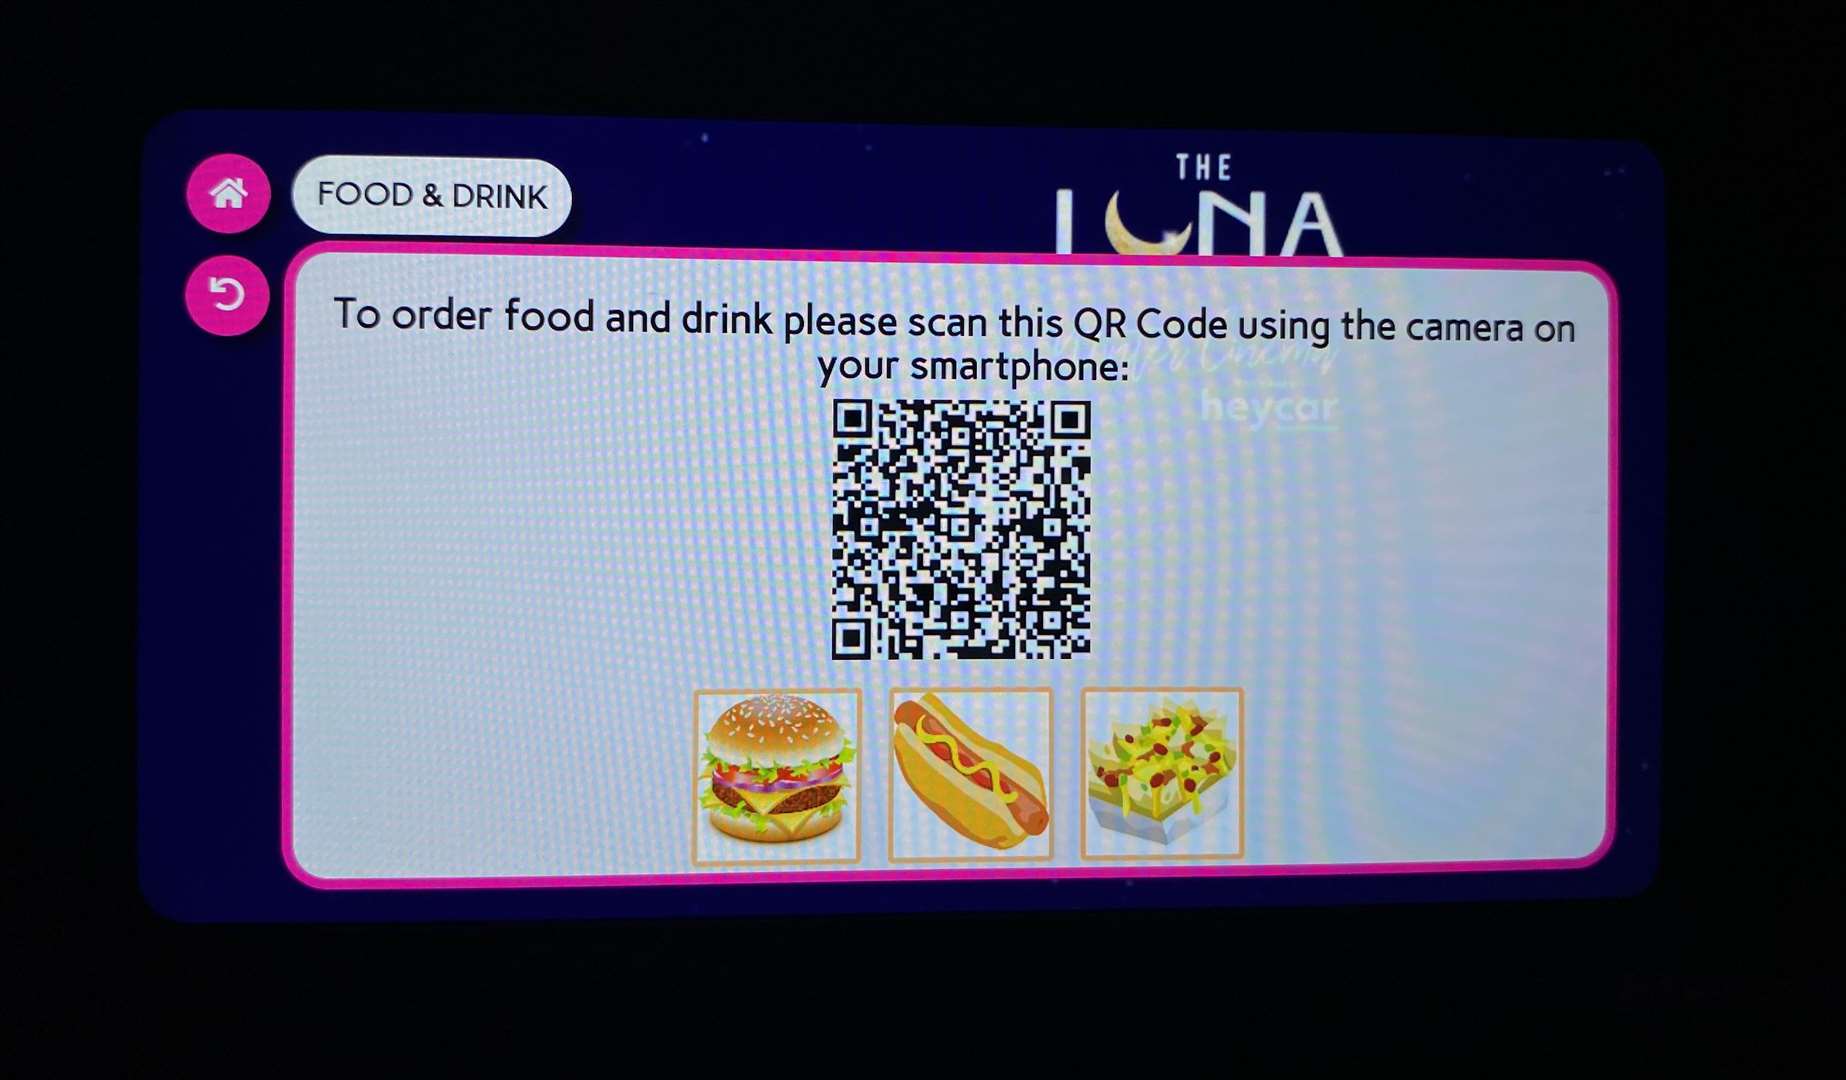 You could order drinks and food from scanning the QR code with your phone